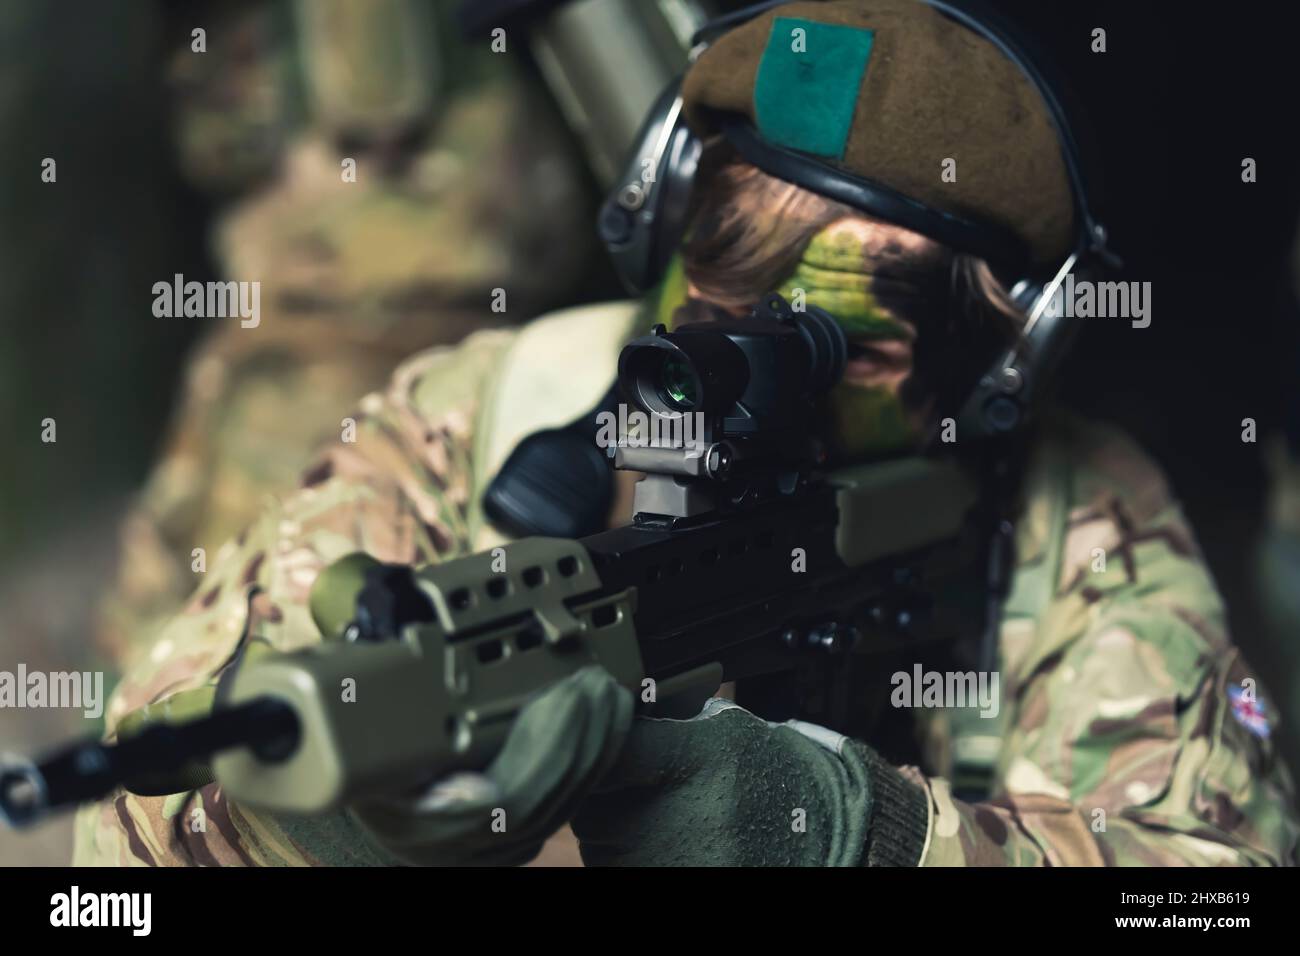 Sturdy strong grip holding a automatic smg during training as a rookie soldier . High quality photo Stock Photo